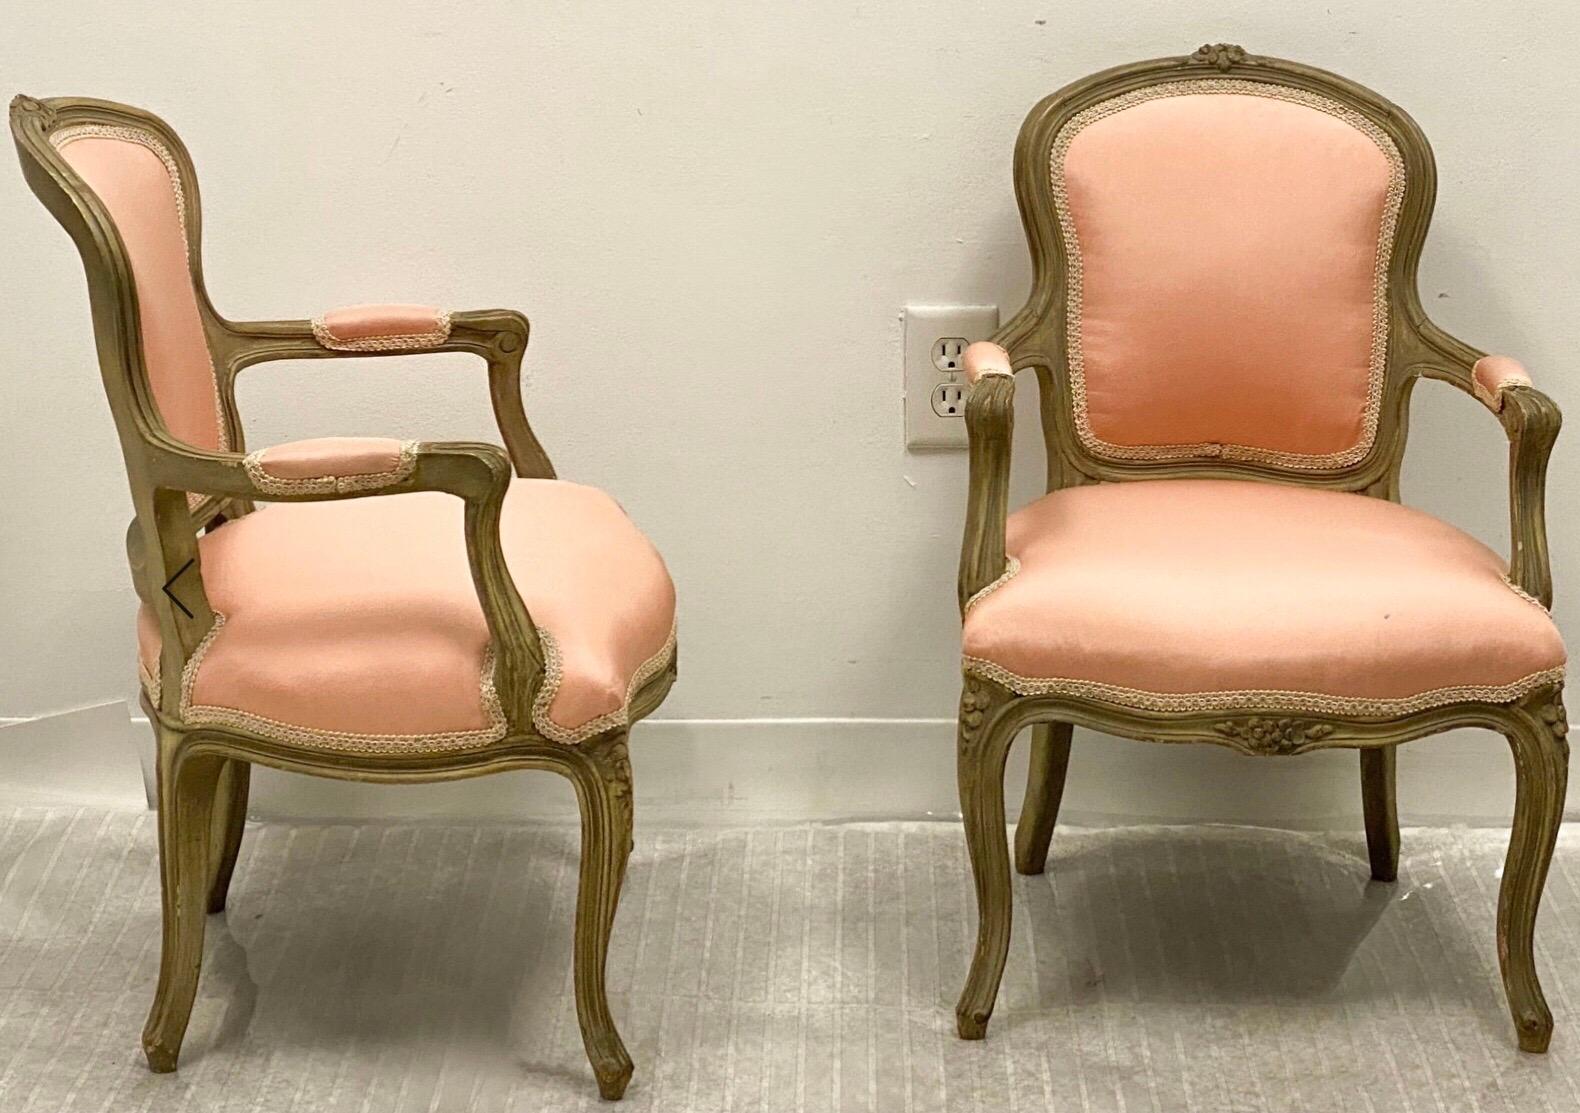 1940s chair styles